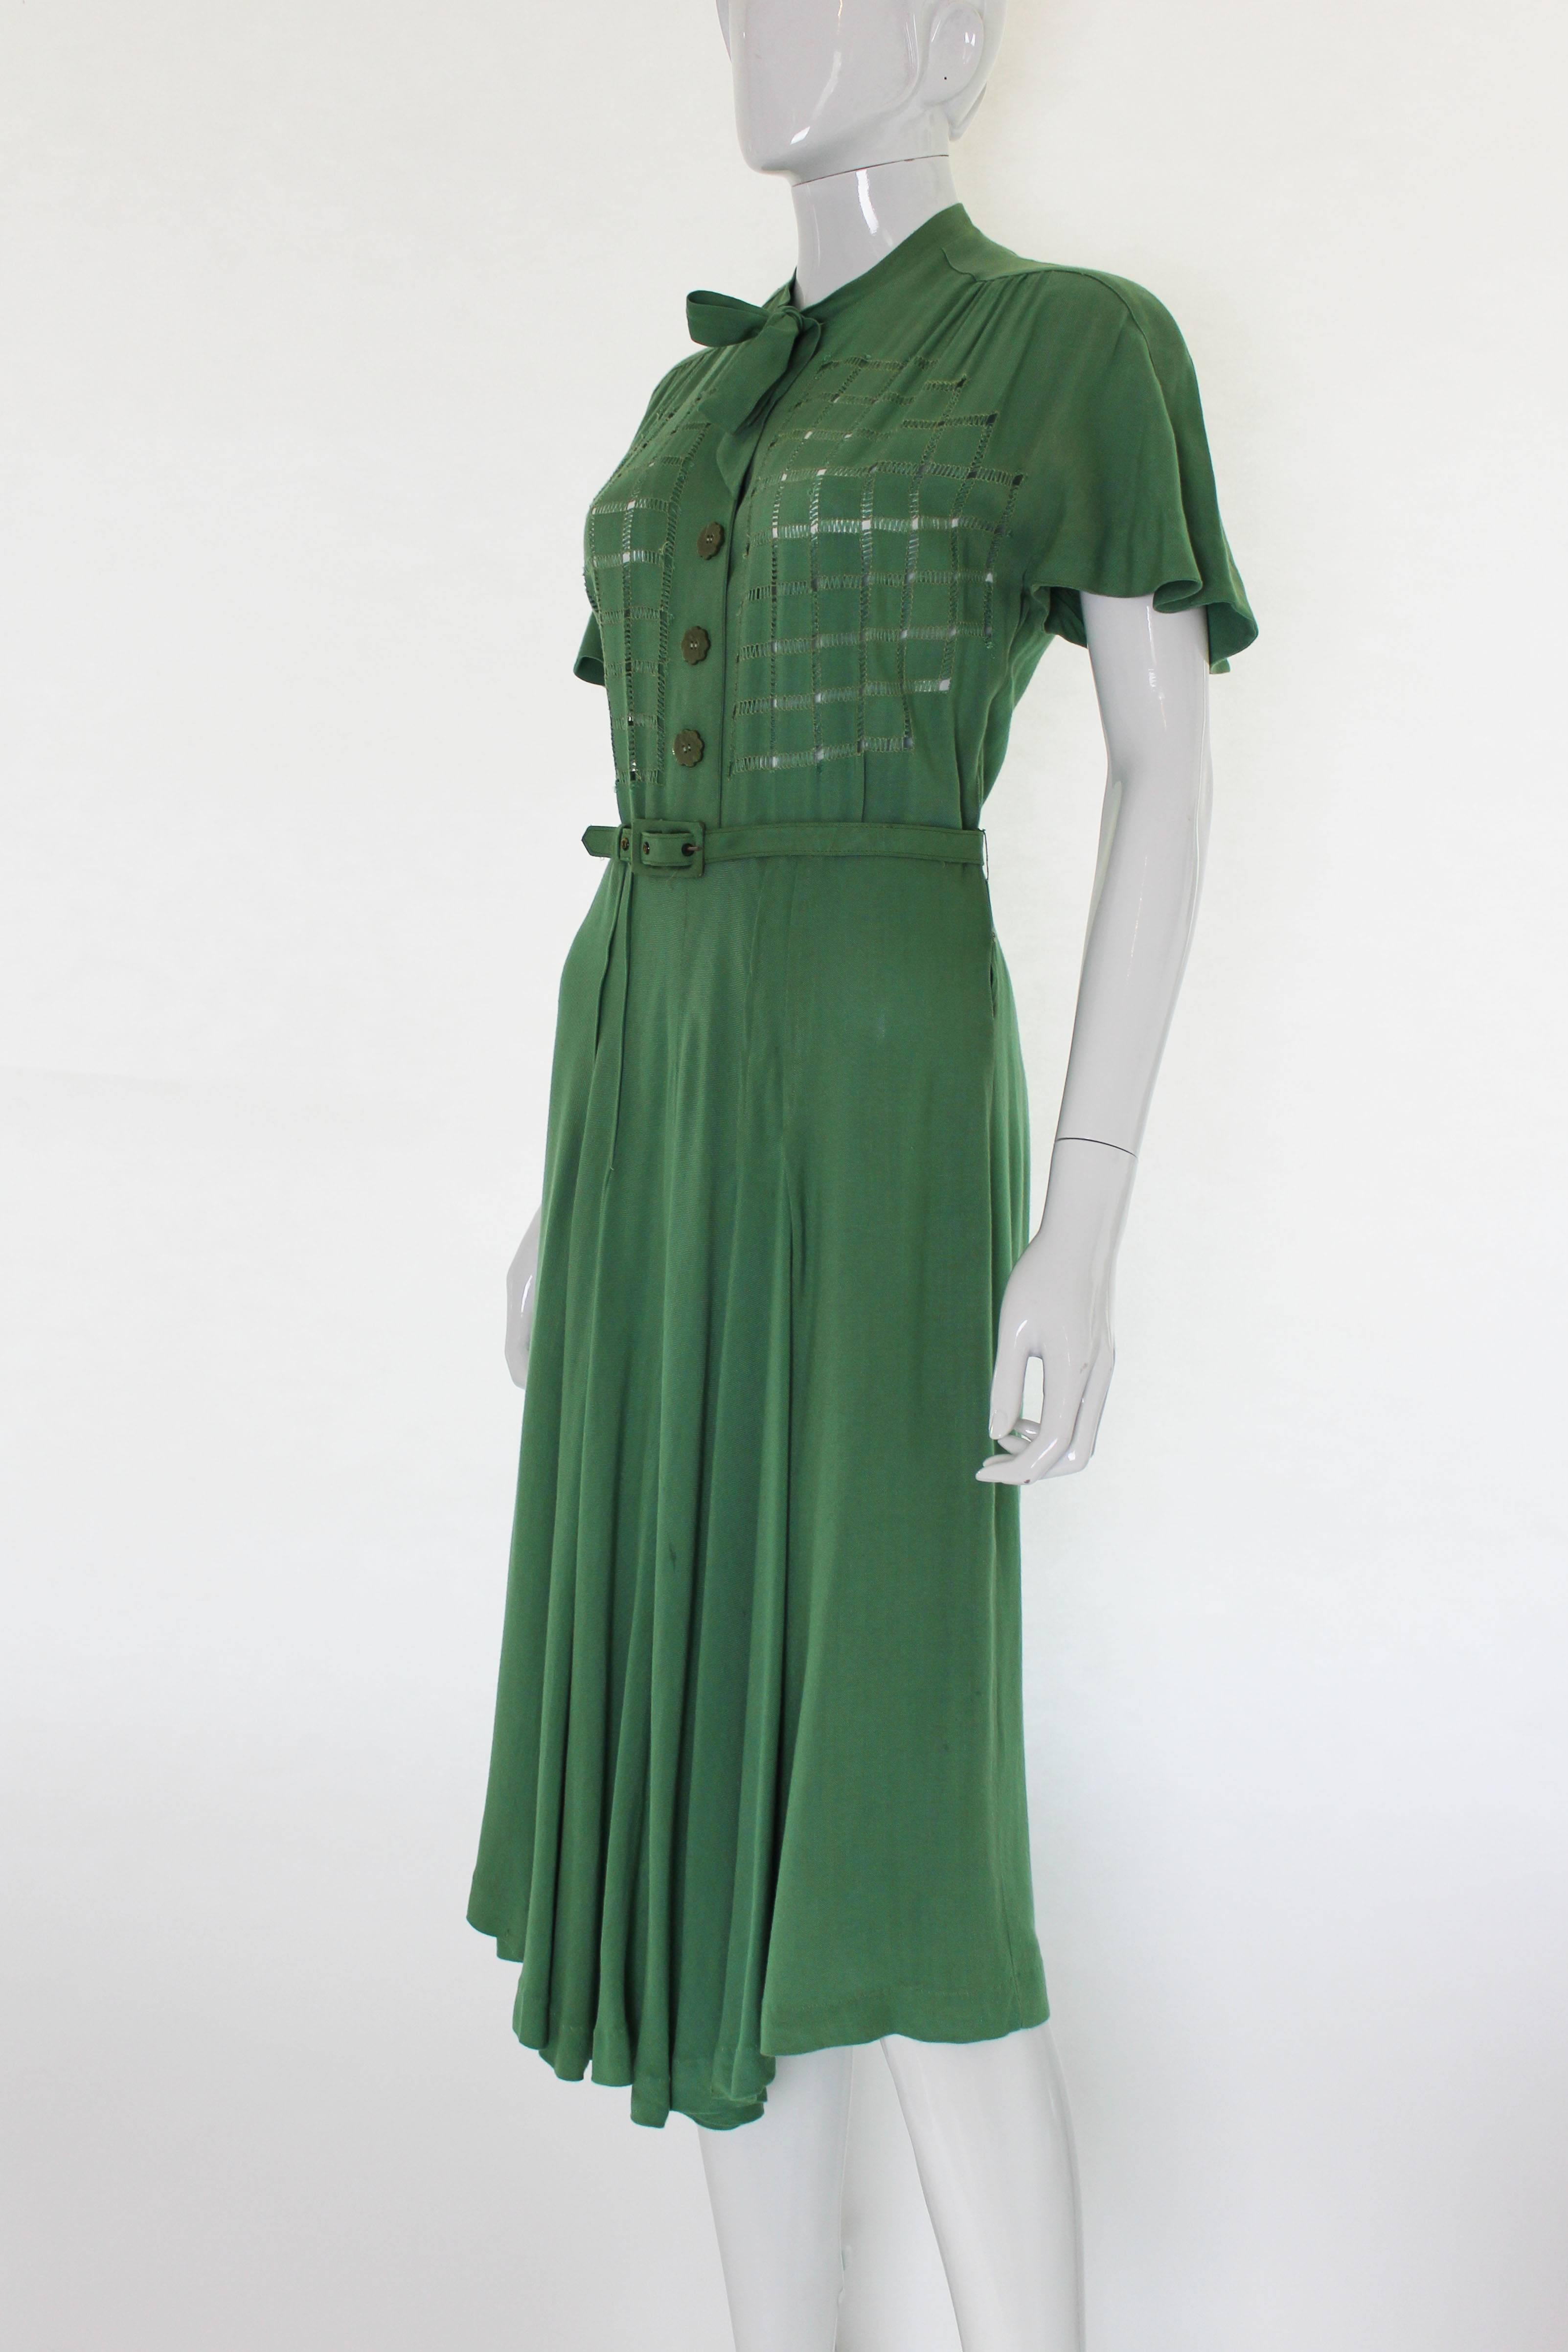 A great 1940s day dress in pistachio green. The fabric is a silk /viscose mix. This dress has wonderful detail and hangs beautifully. It has a tie neck, three very pretty buttons and pretty stitch detail on the front. There are four pleats on the